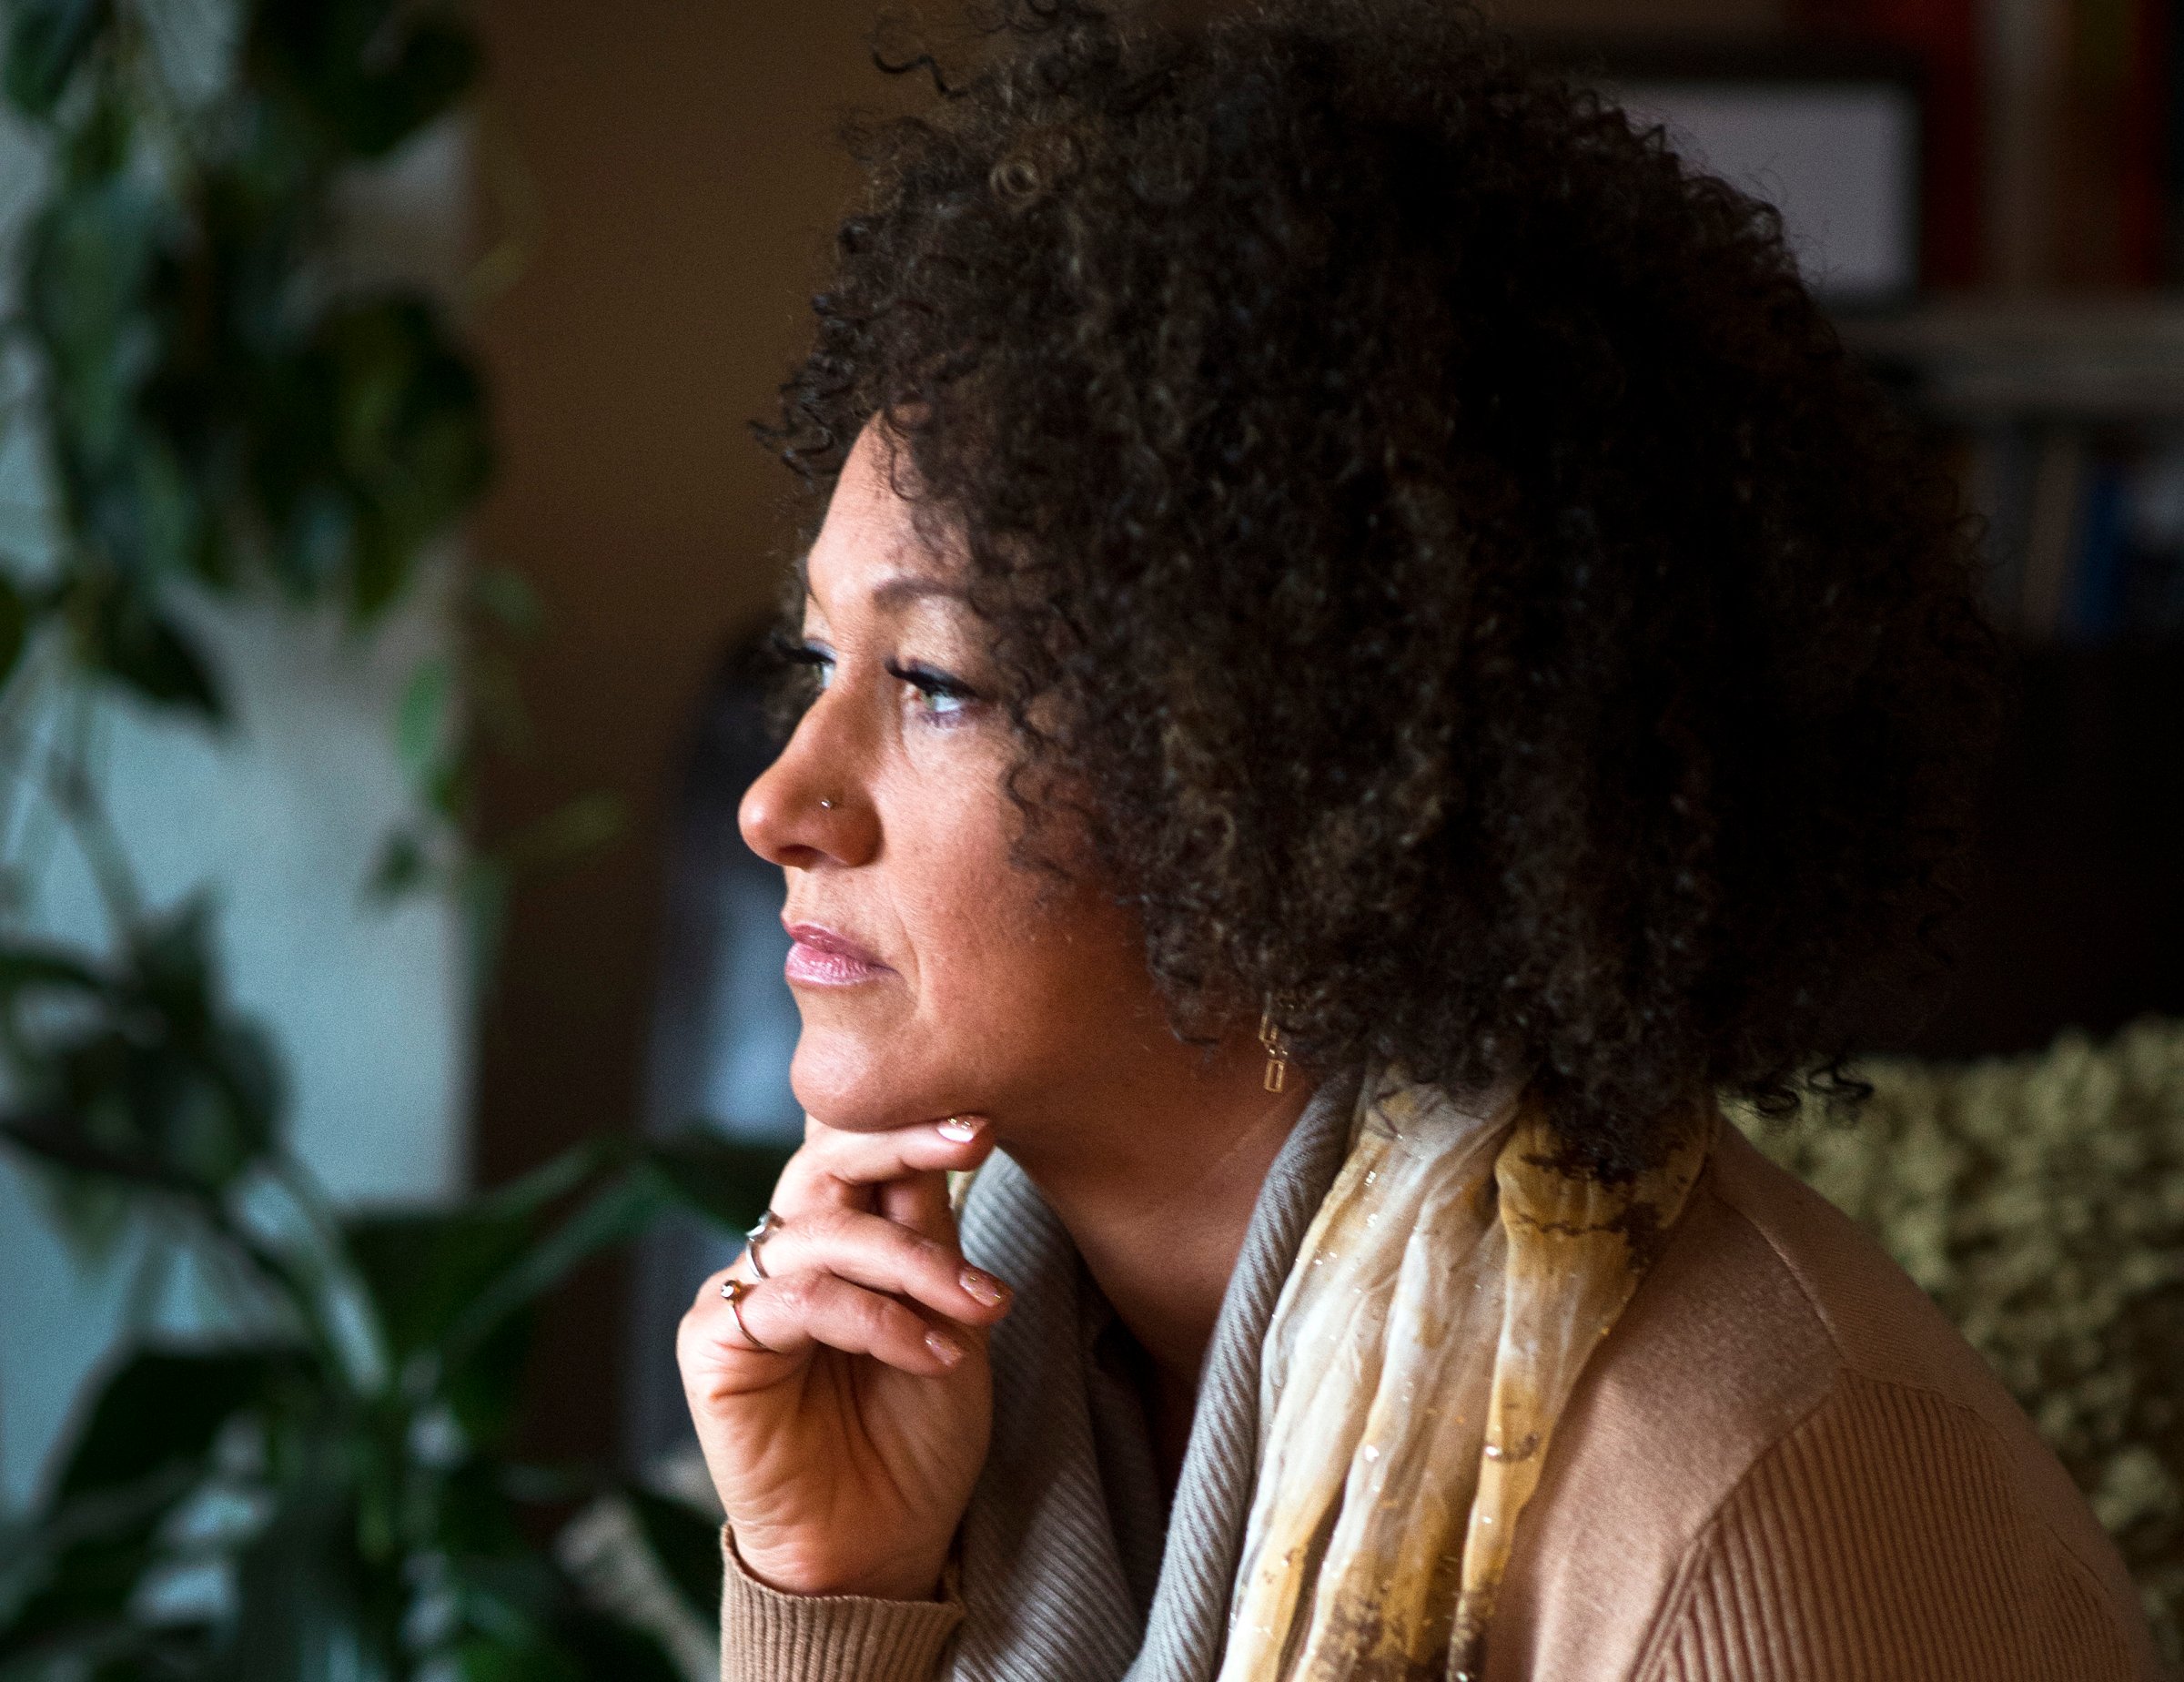 Rachel Dolezal, president of the Spokane chapter of the NAACP, poses for a photo in her Spokane, Wash., home on March 2, 2015.